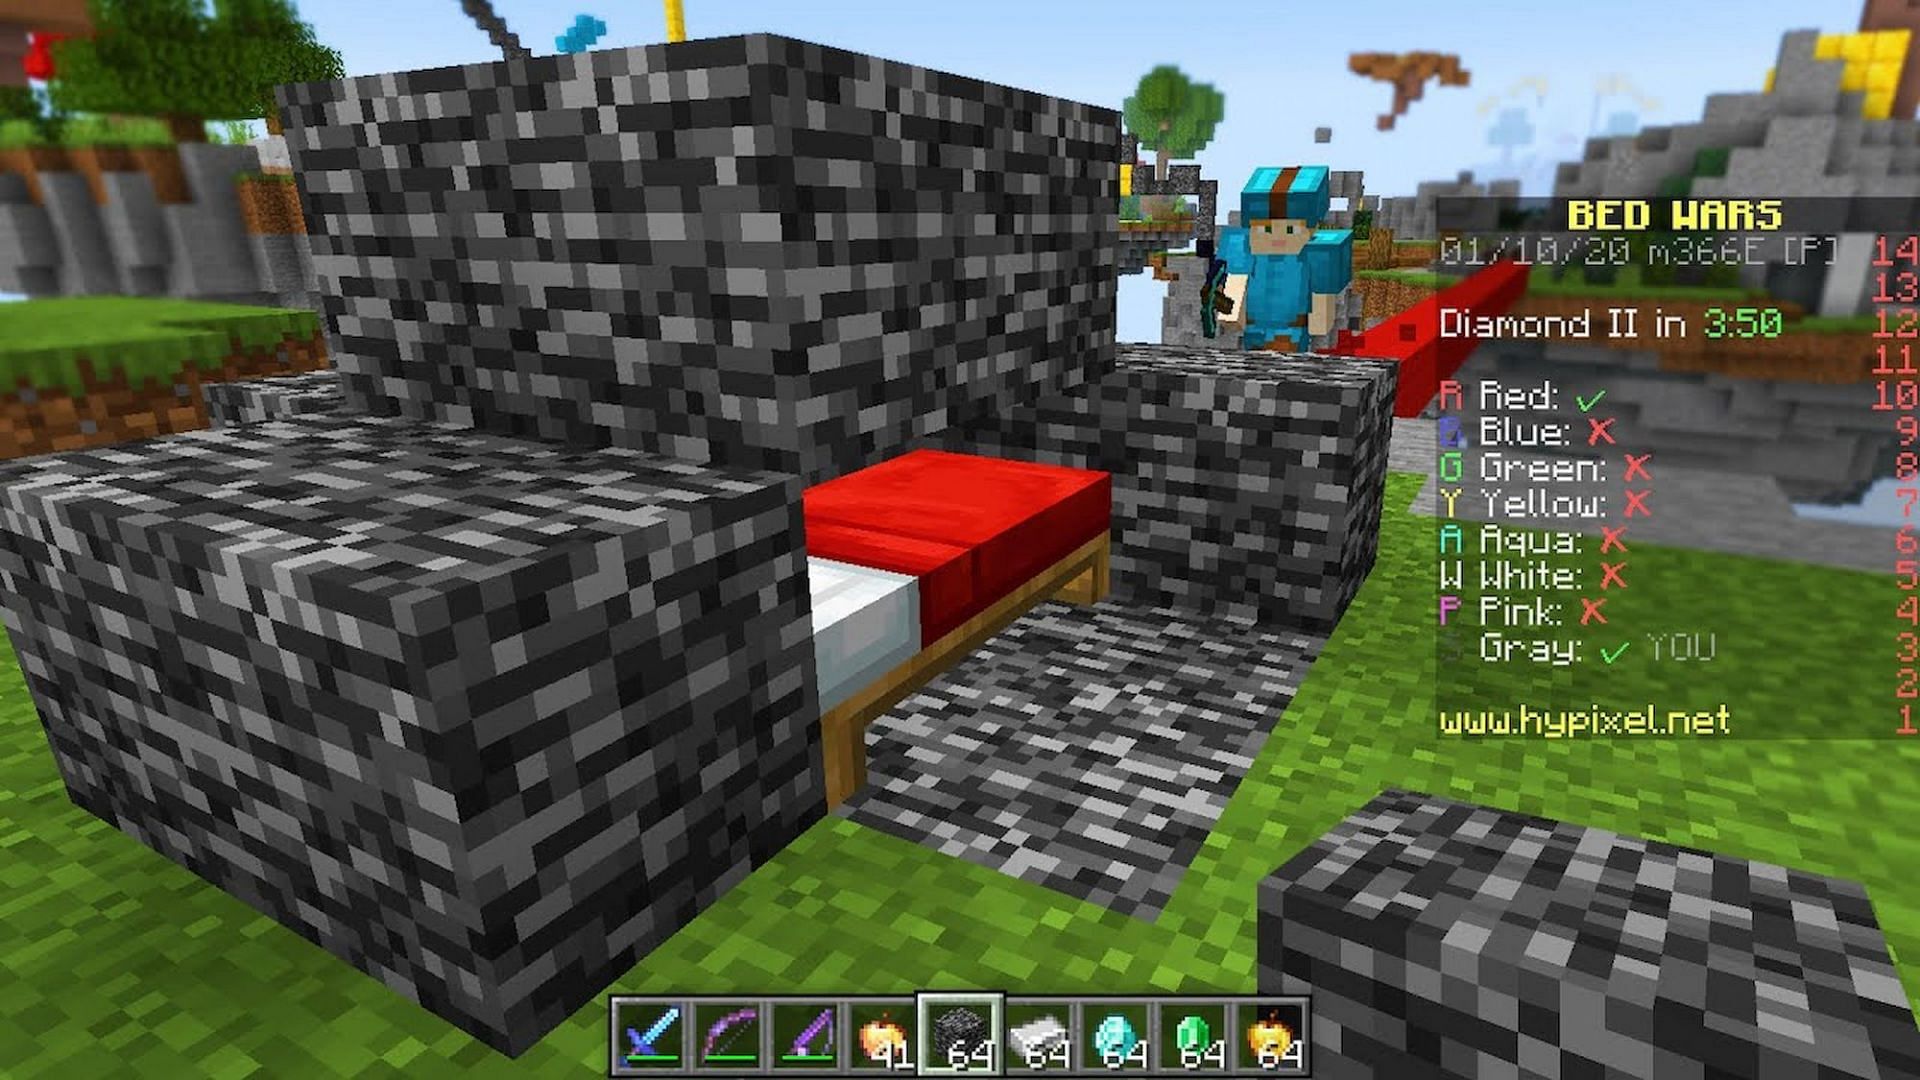 Minecraft Bedwars can be a crazy, chaotic game where players need to protect their beds at all costs. (Image via Graser/Youtube)